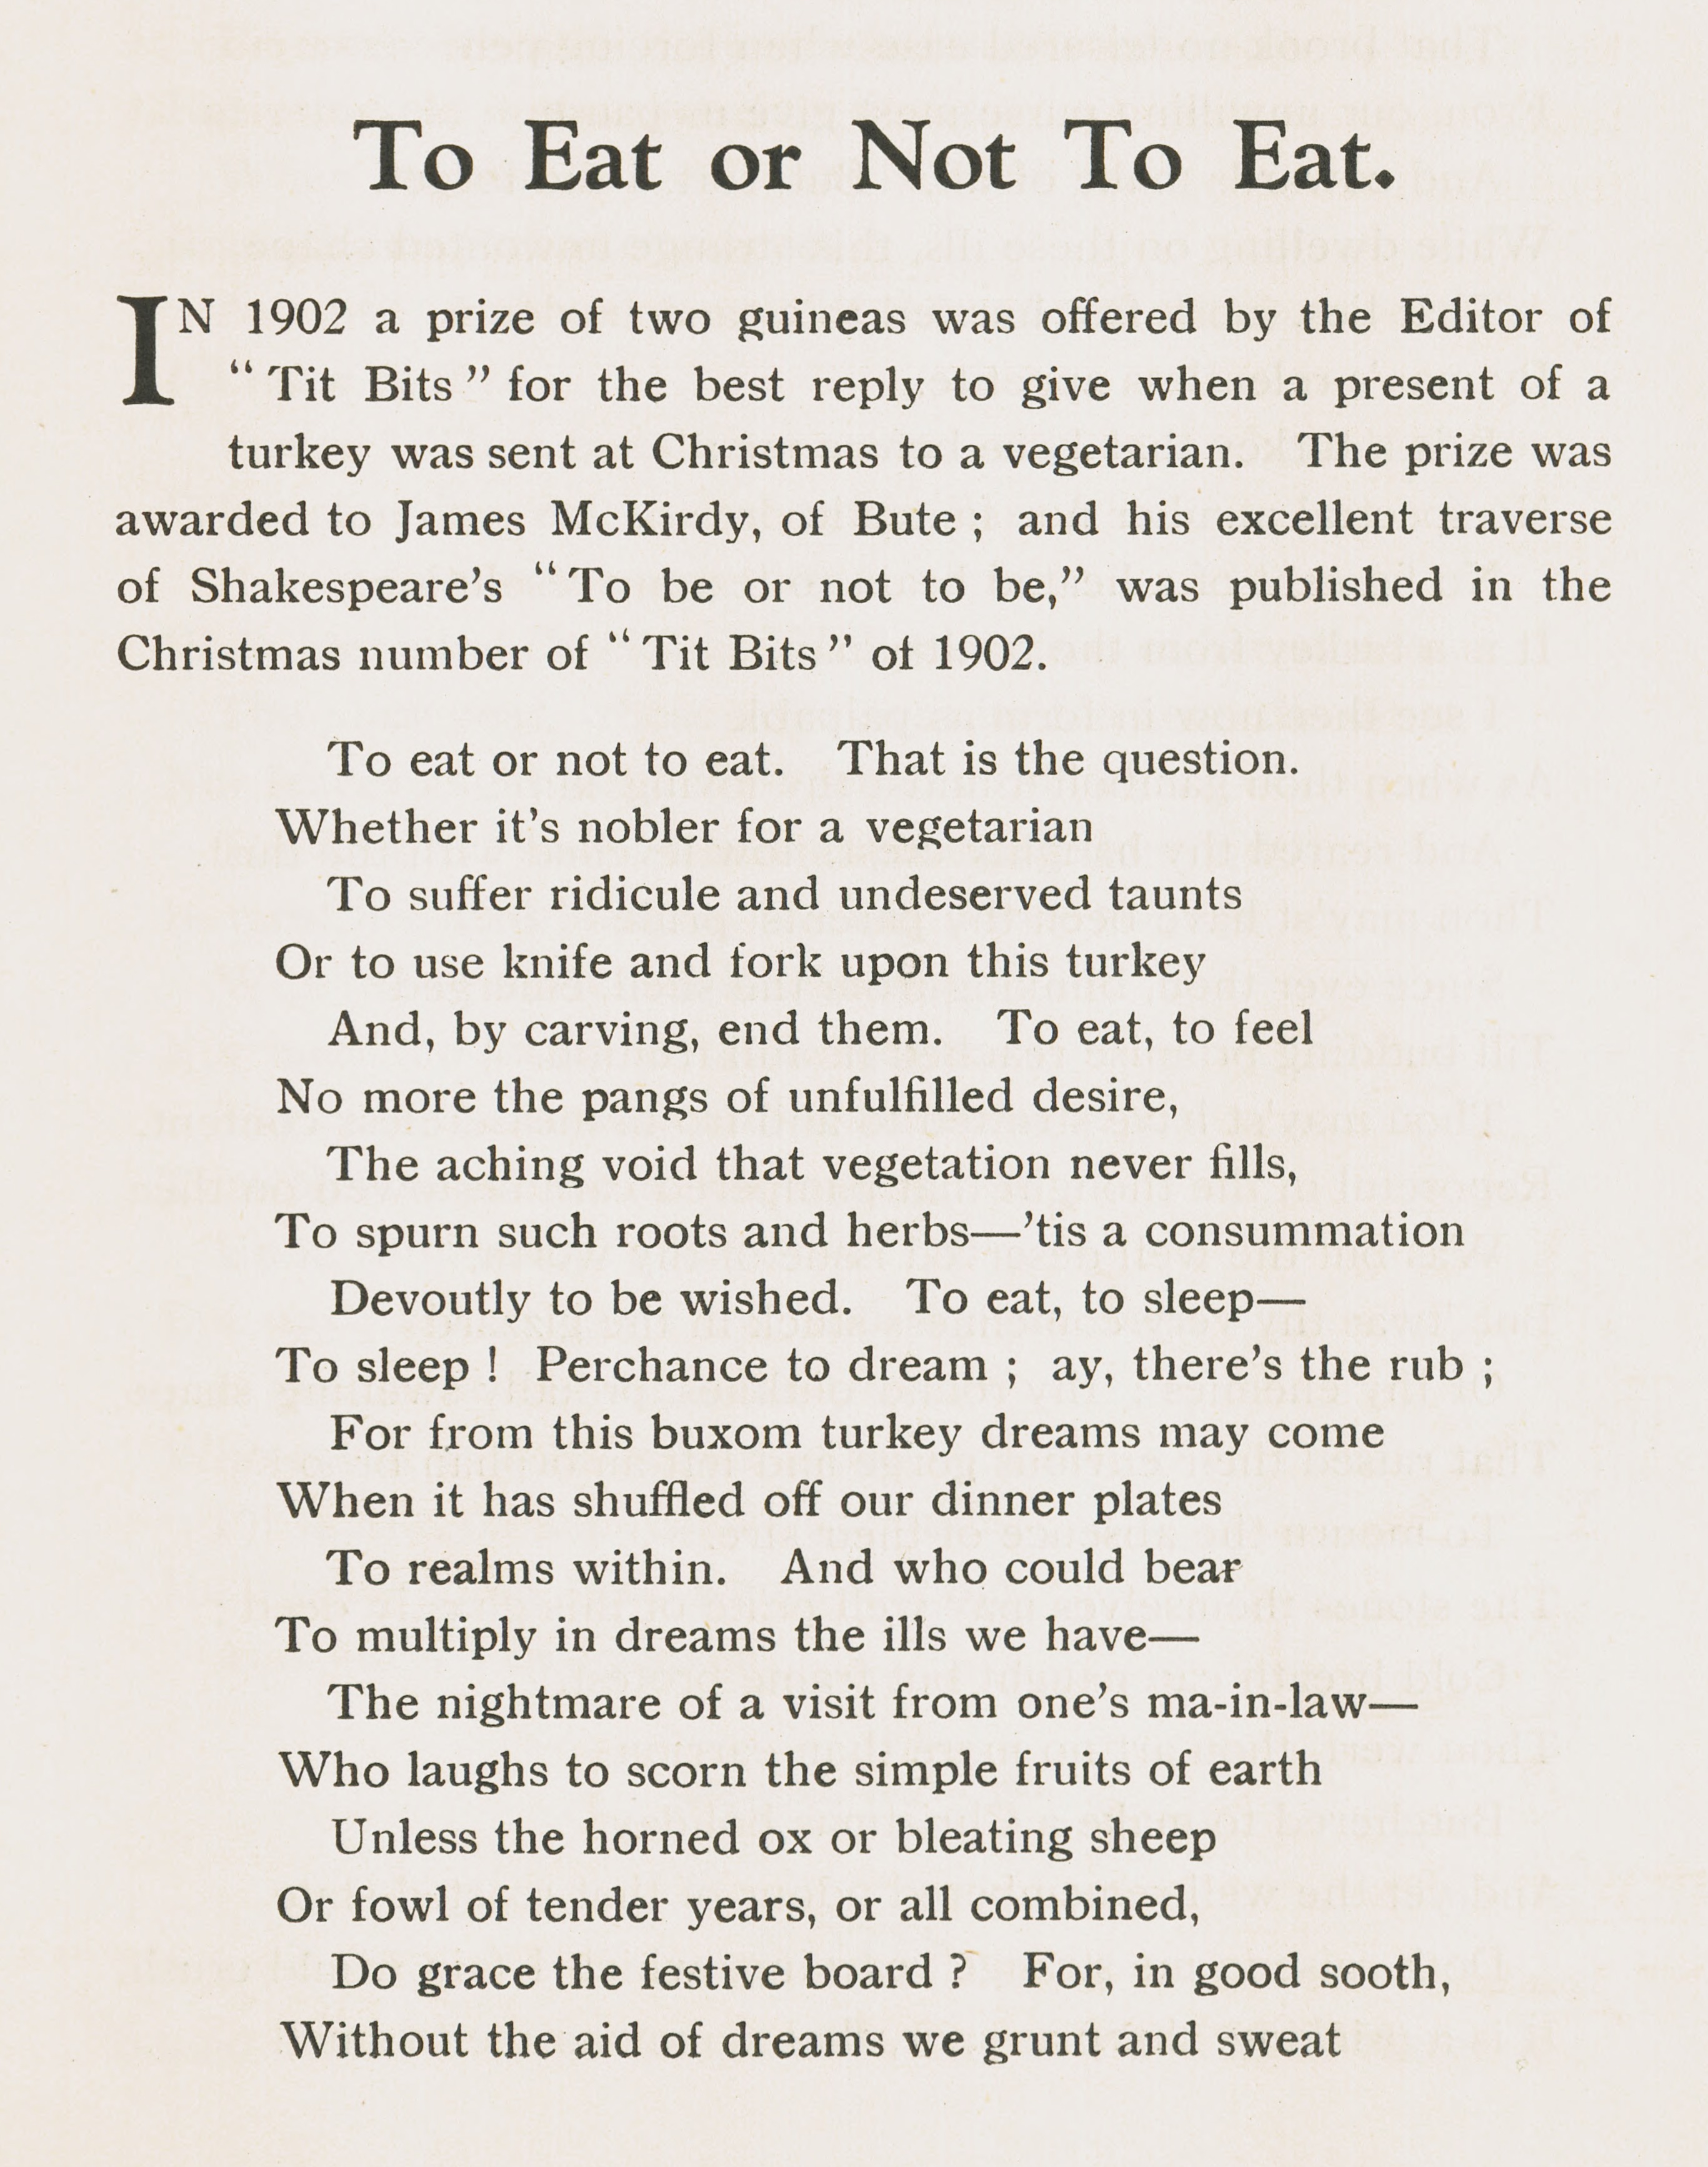 Excerpt from a poem by James McKirdy titled 'To eat or not to eat' (1902)